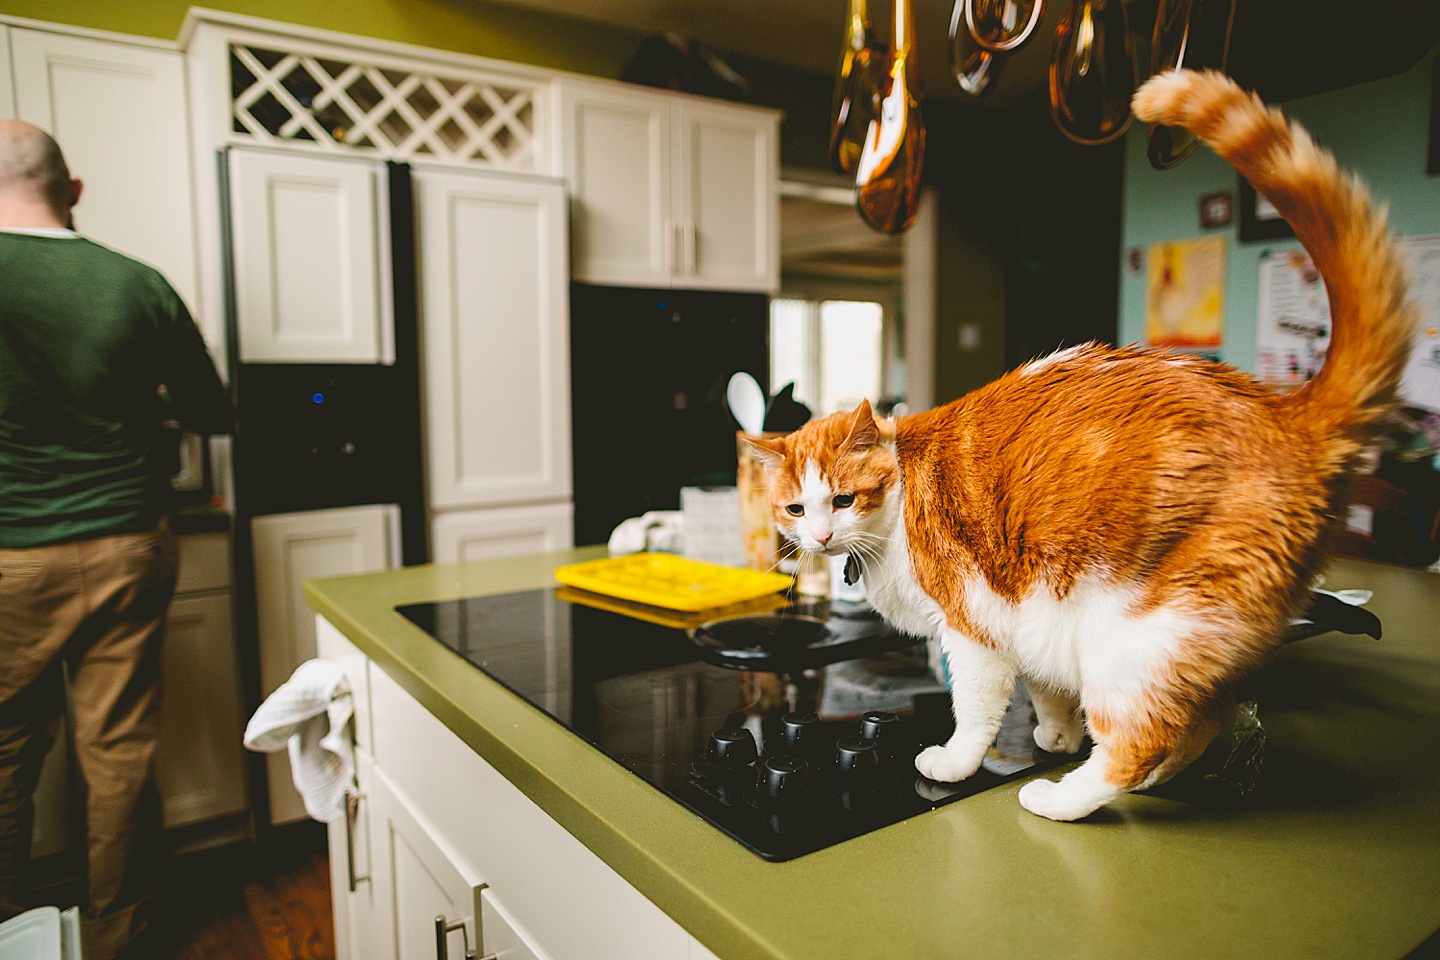 Orange and white tabby cat standing on kitchen counter